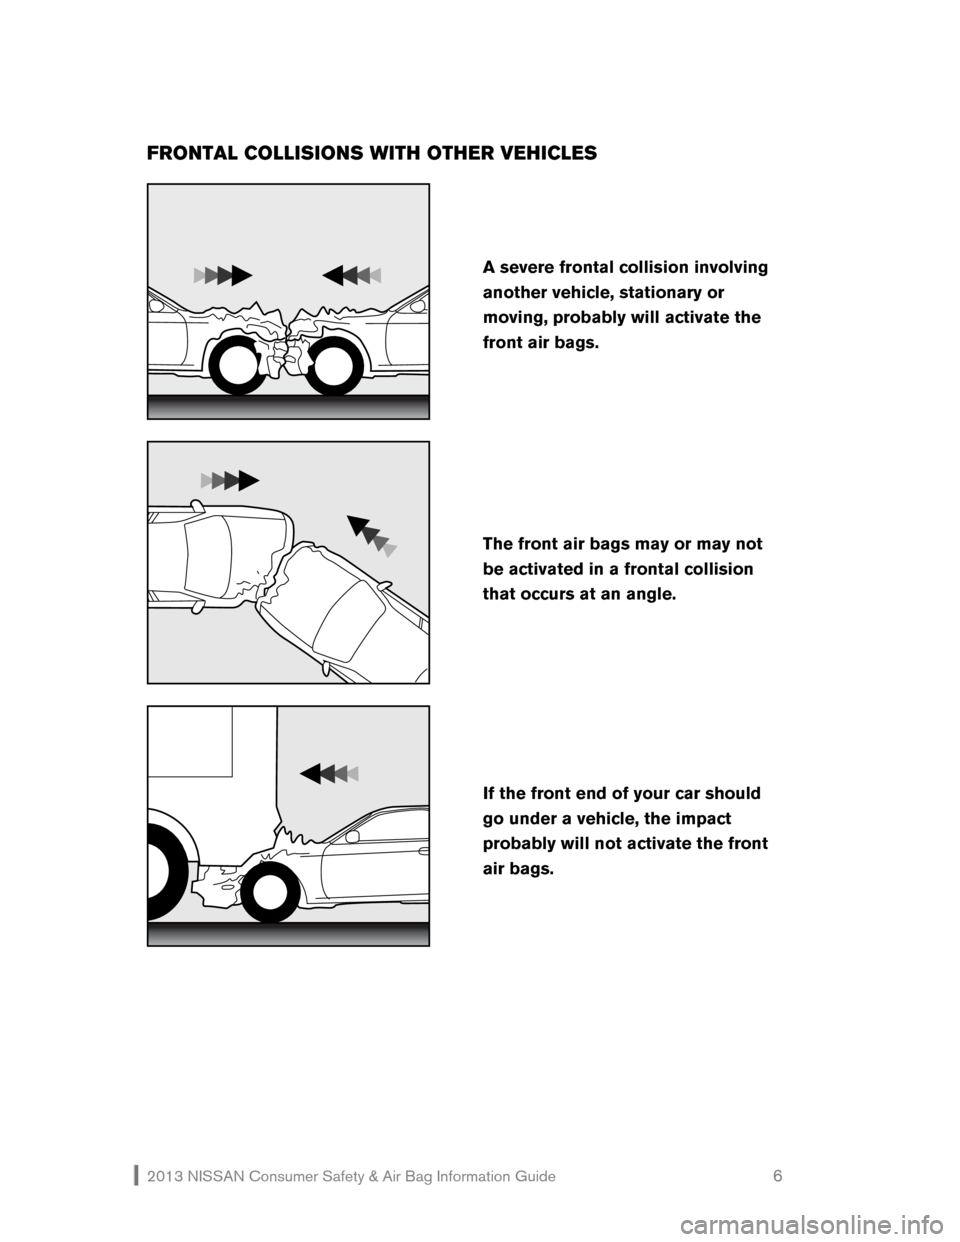 NISSAN XTERRA 2013 N50 / 2.G Consumer Safety Air Bag Information Guide 2013 NISSAN Consumer Safety & Air Bag Information Guide                                                   6 
FRONTAL COLLISIONS WITH OTHER VEHICLES 
 
 
 
 
If the front end of your car should 
go und